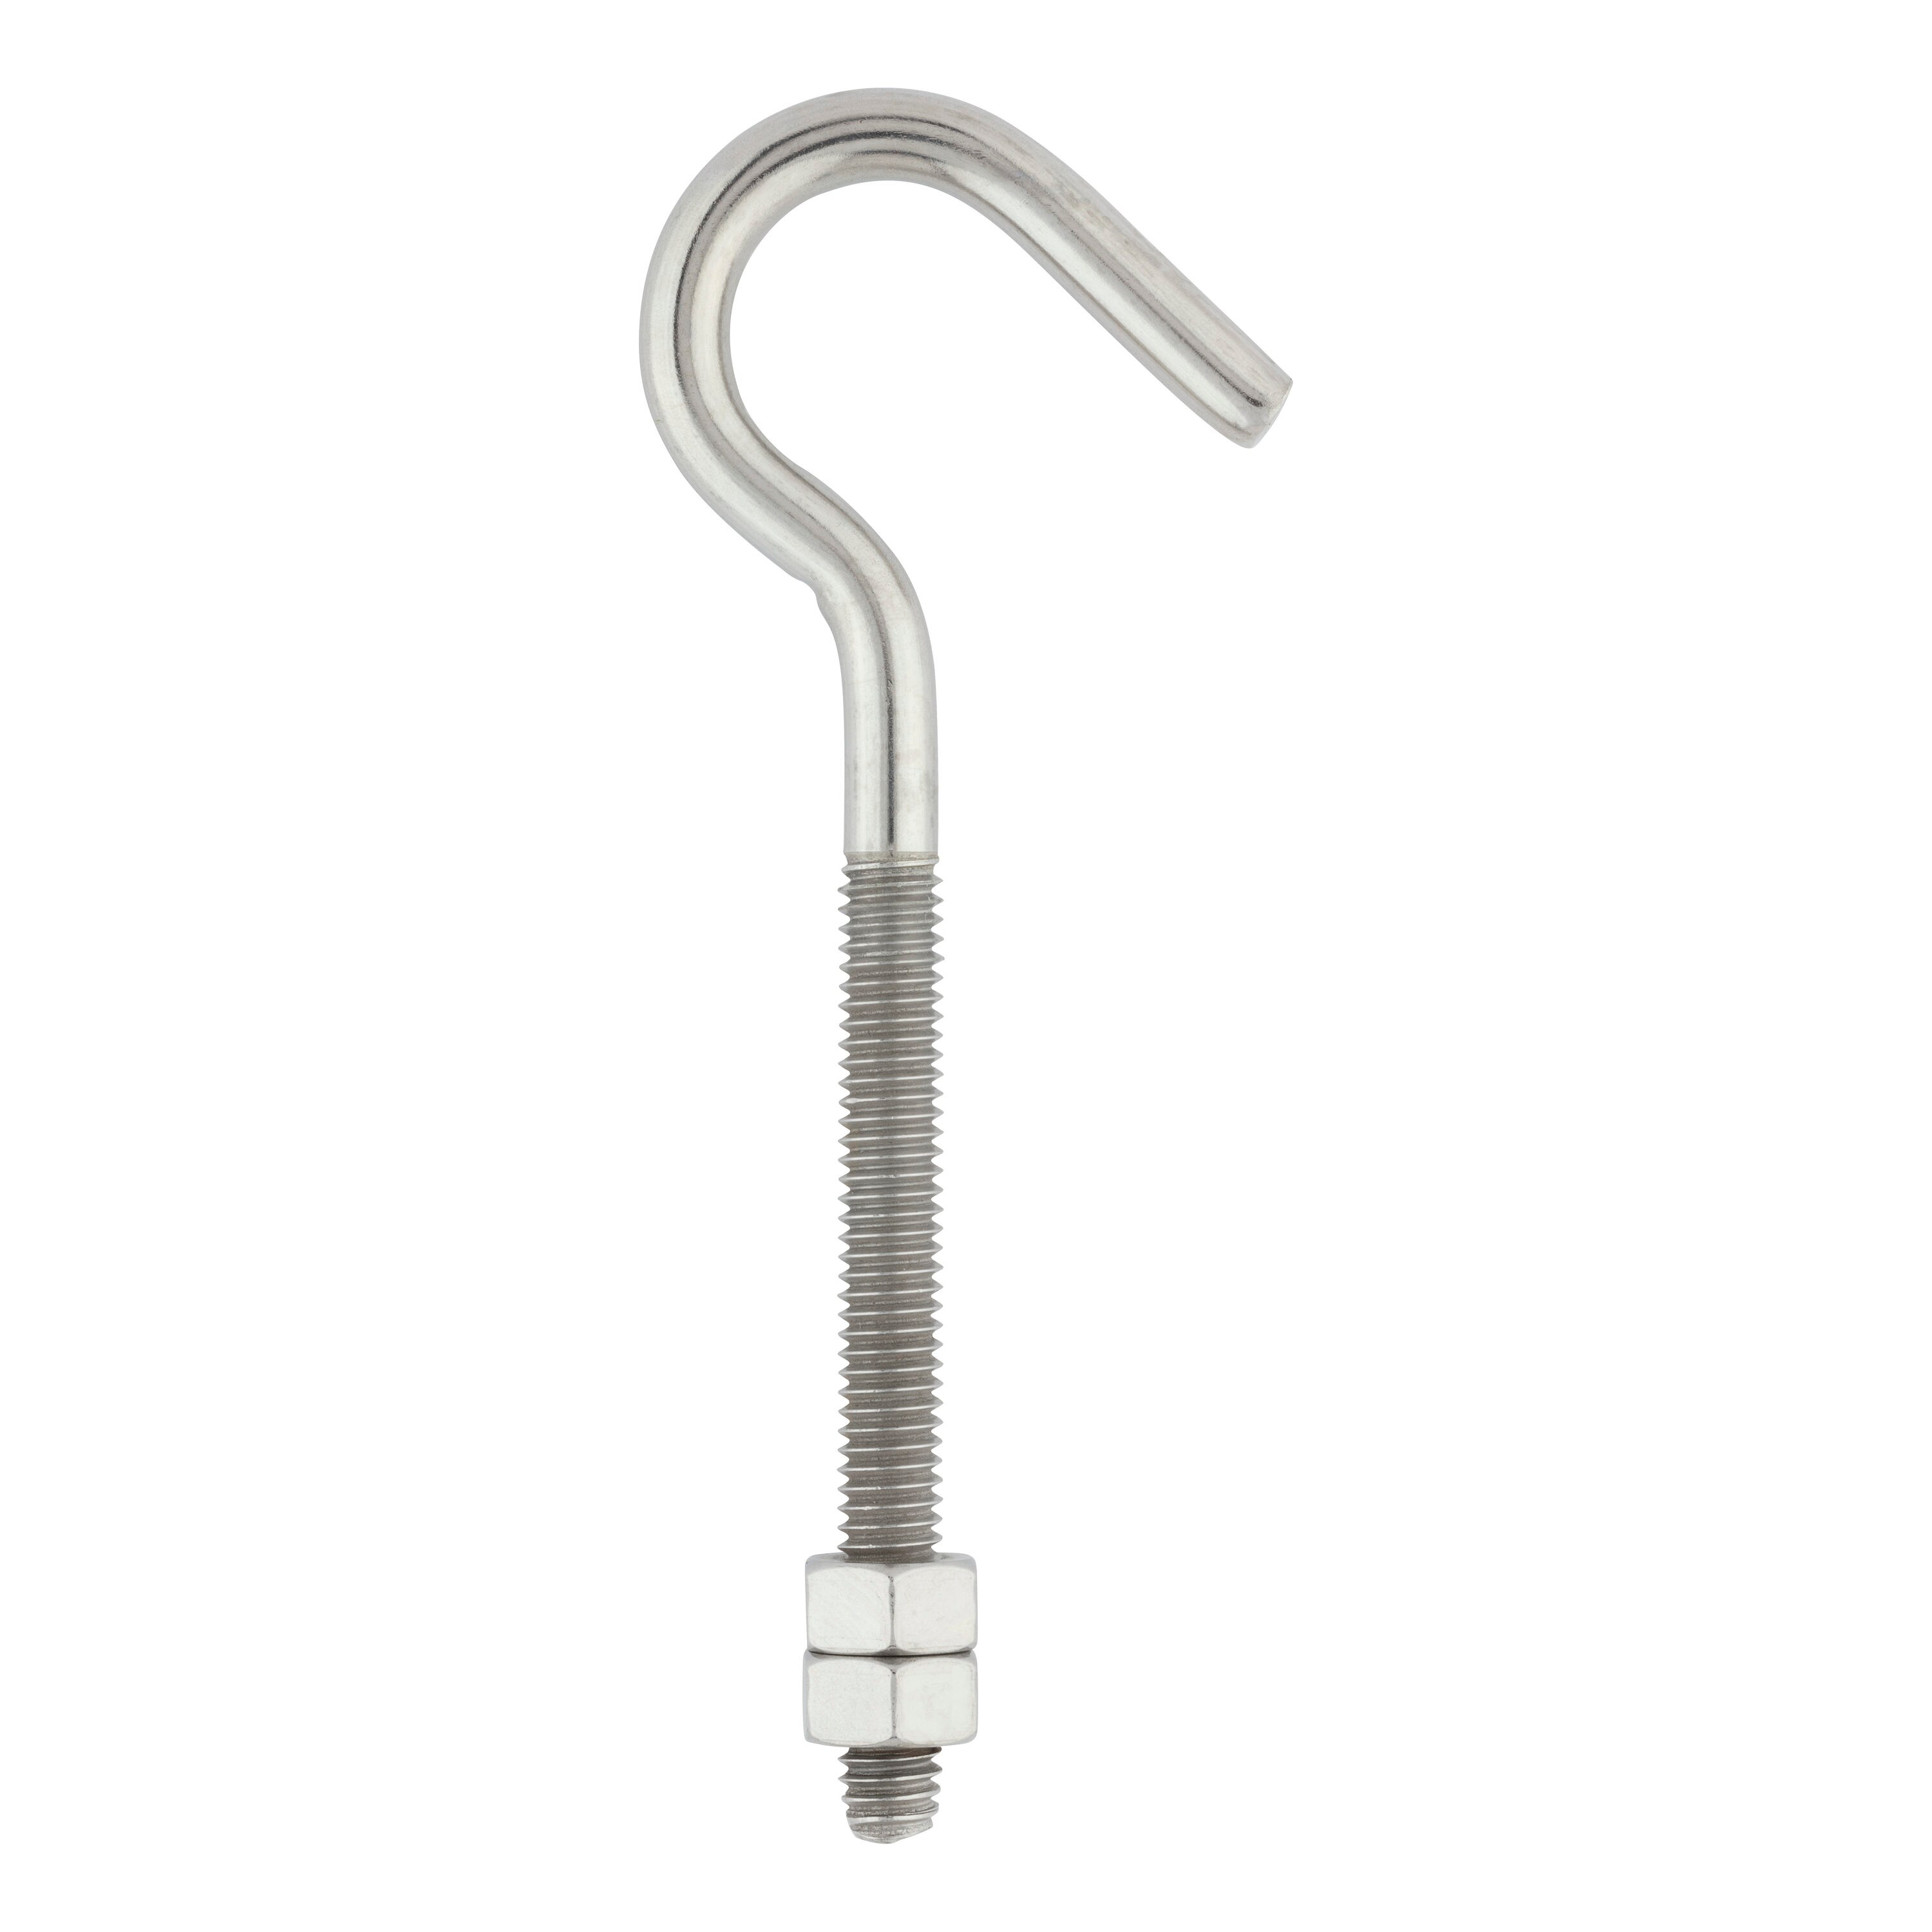  Birsppy 1 Stainless Steel Cup Hooks Corrosion Resistant Screw  in (Pack of 10) Silver : Home & Kitchen